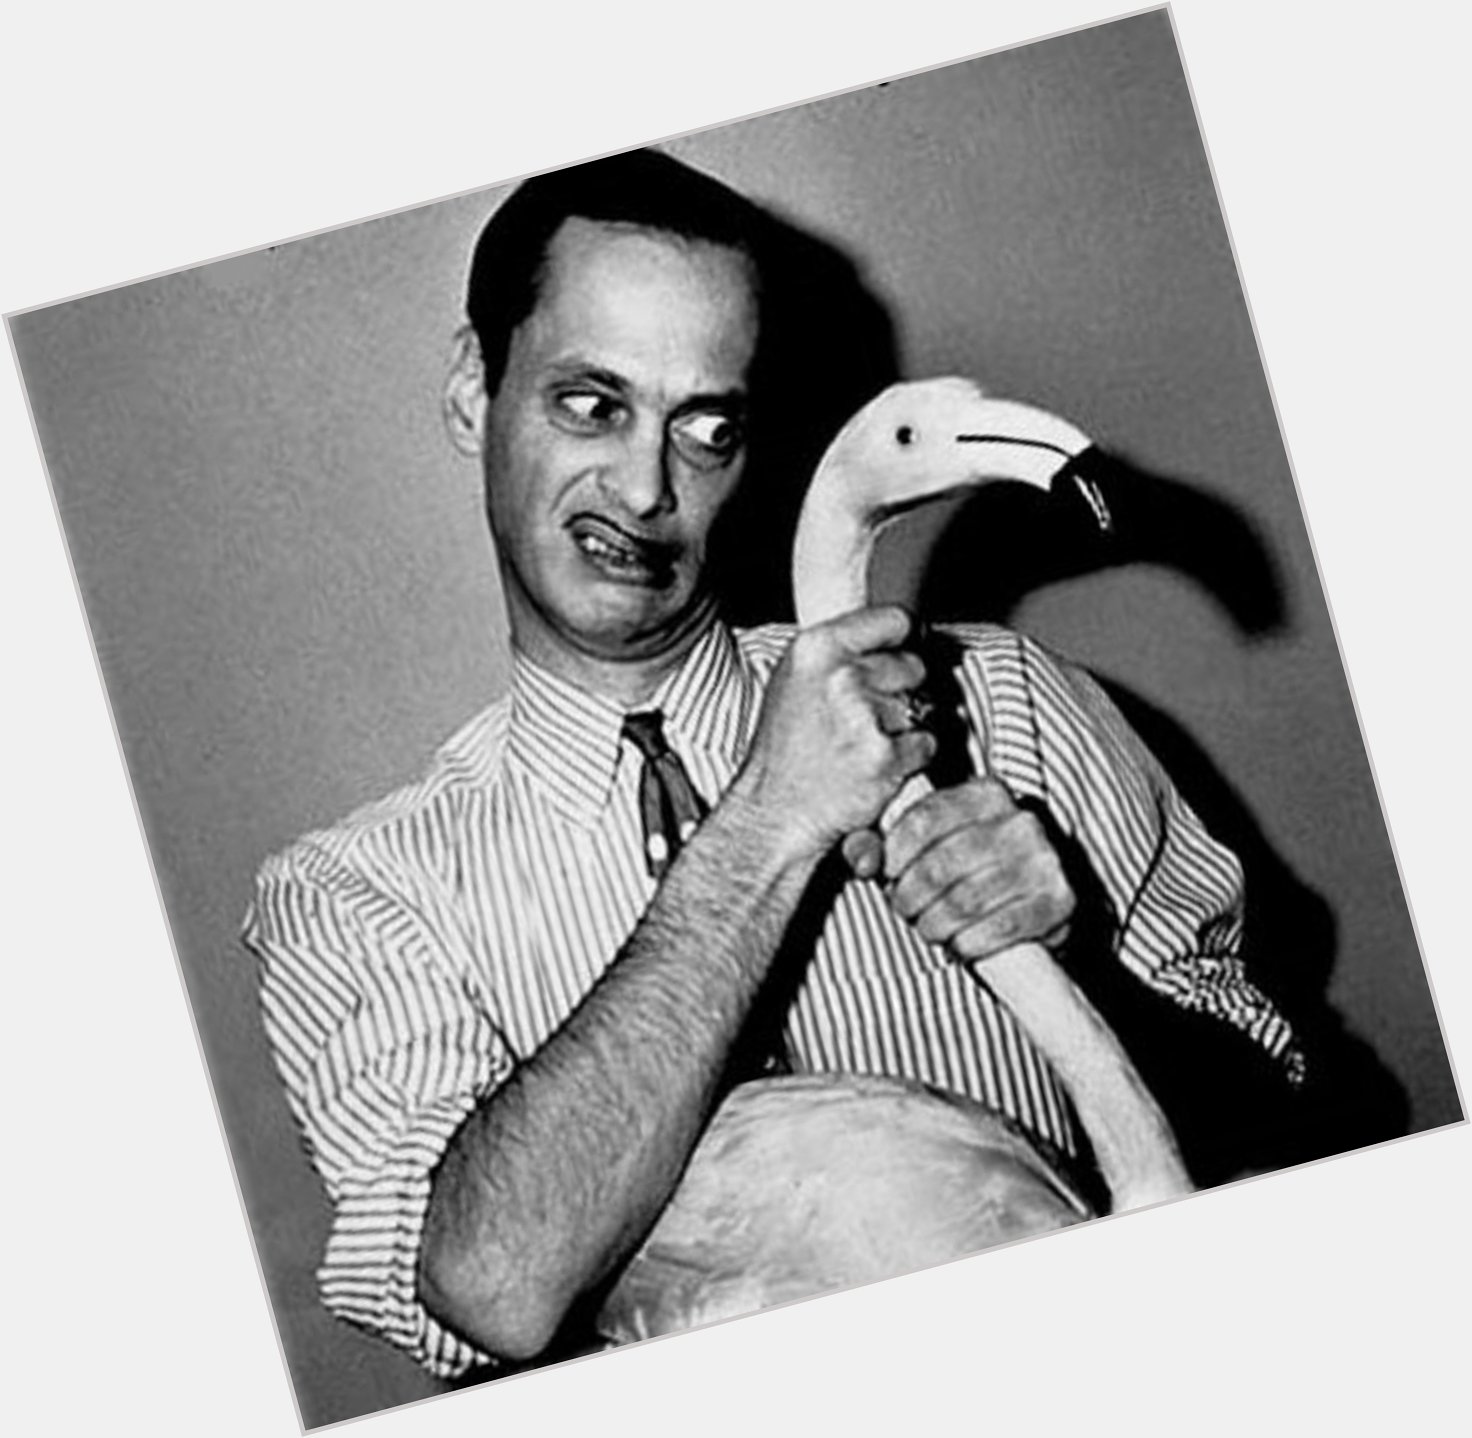 Happy Birthday John Waters! 
Horror or not, one day I m going to cover some of his most gloriously grotesque movies 